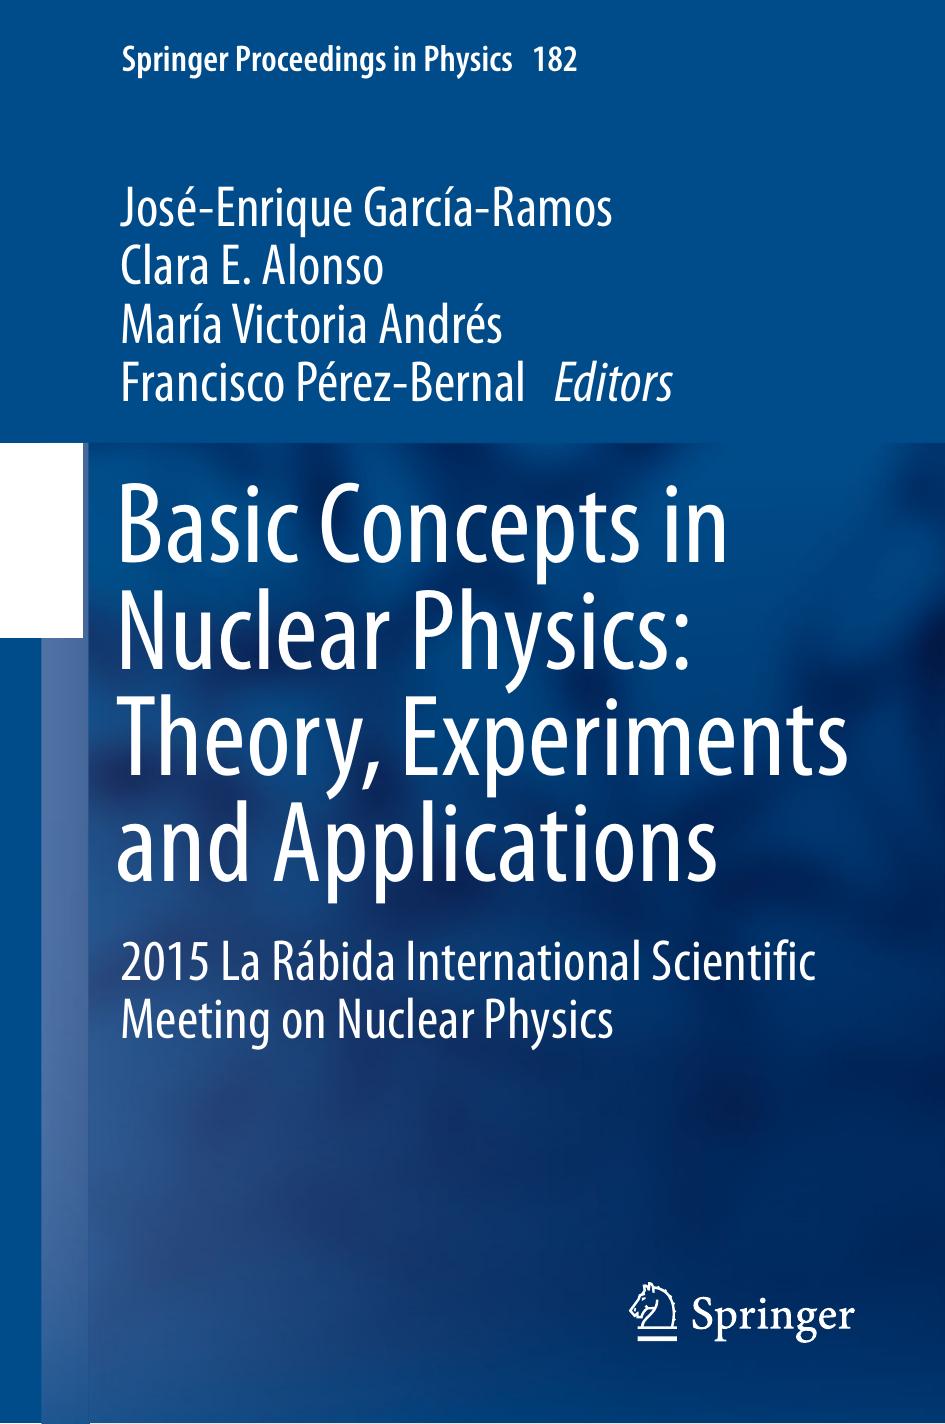 Basic Concepts in Nuclear Physics Theory, Experiments and Applications 2015 La Rábida International 2016